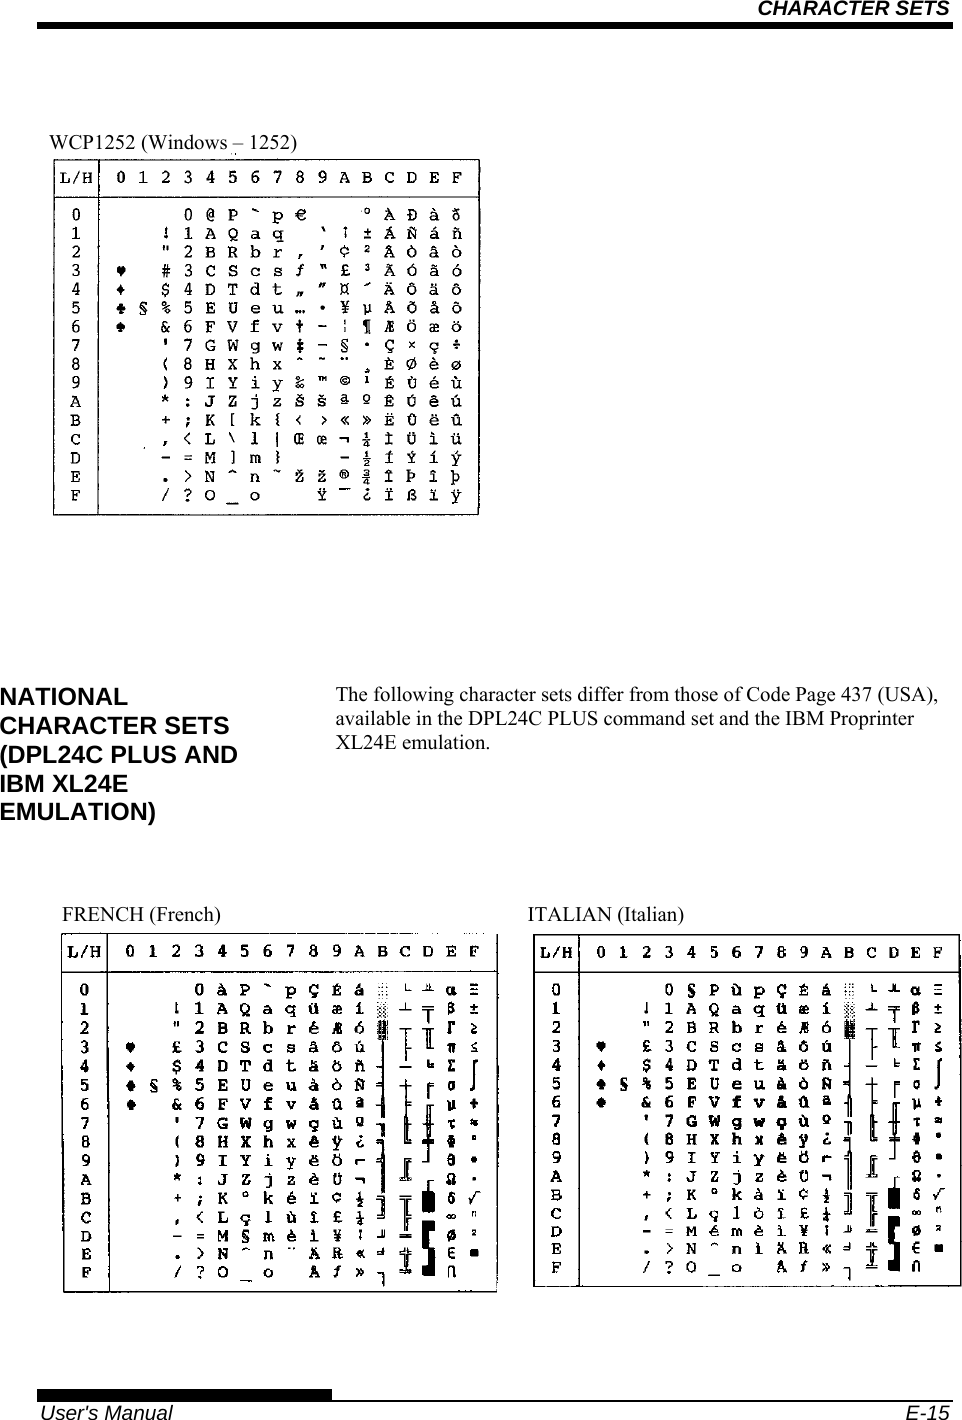 CHARACTER SETS    User&apos;s Manual  E-15               The following character sets differ from those of Code Page 437 (USA), available in the DPL24C PLUS command set and the IBM Proprinter XL24E emulation.               NATIONAL CHARACTER SETS (DPL24C PLUS AND IBM XL24E EMULATION) FRENCH (French)  ITALIAN (Italian)  WCP1252 (Windows – 1252)     